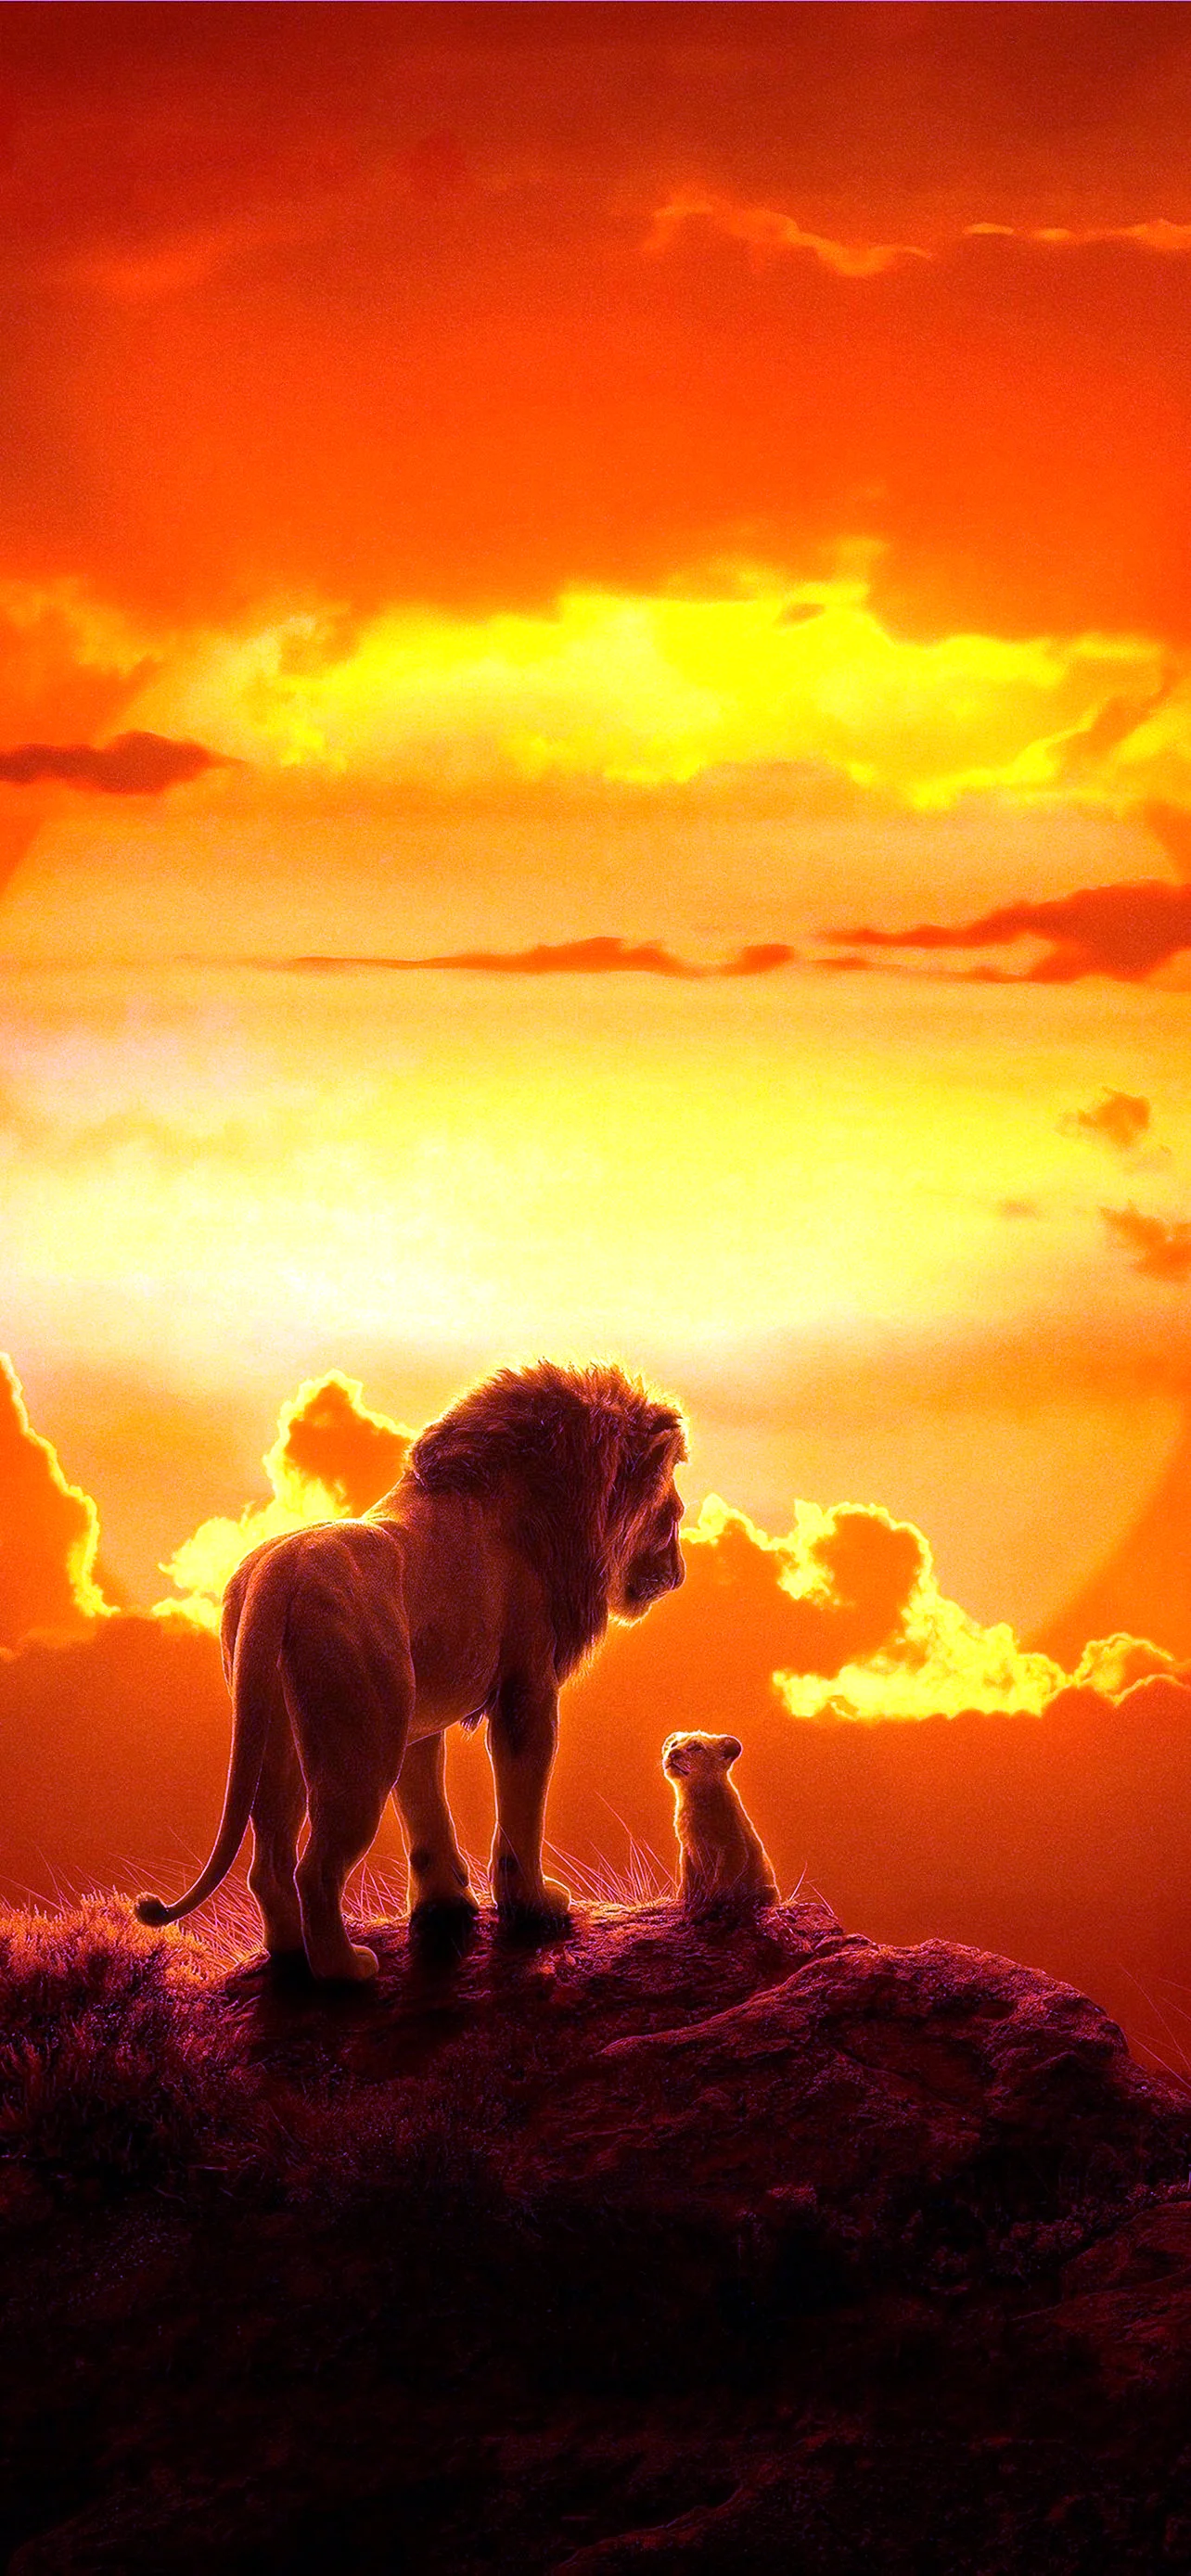 The Lion King 2019 Wallpaper for iPhone 13 Pro Max